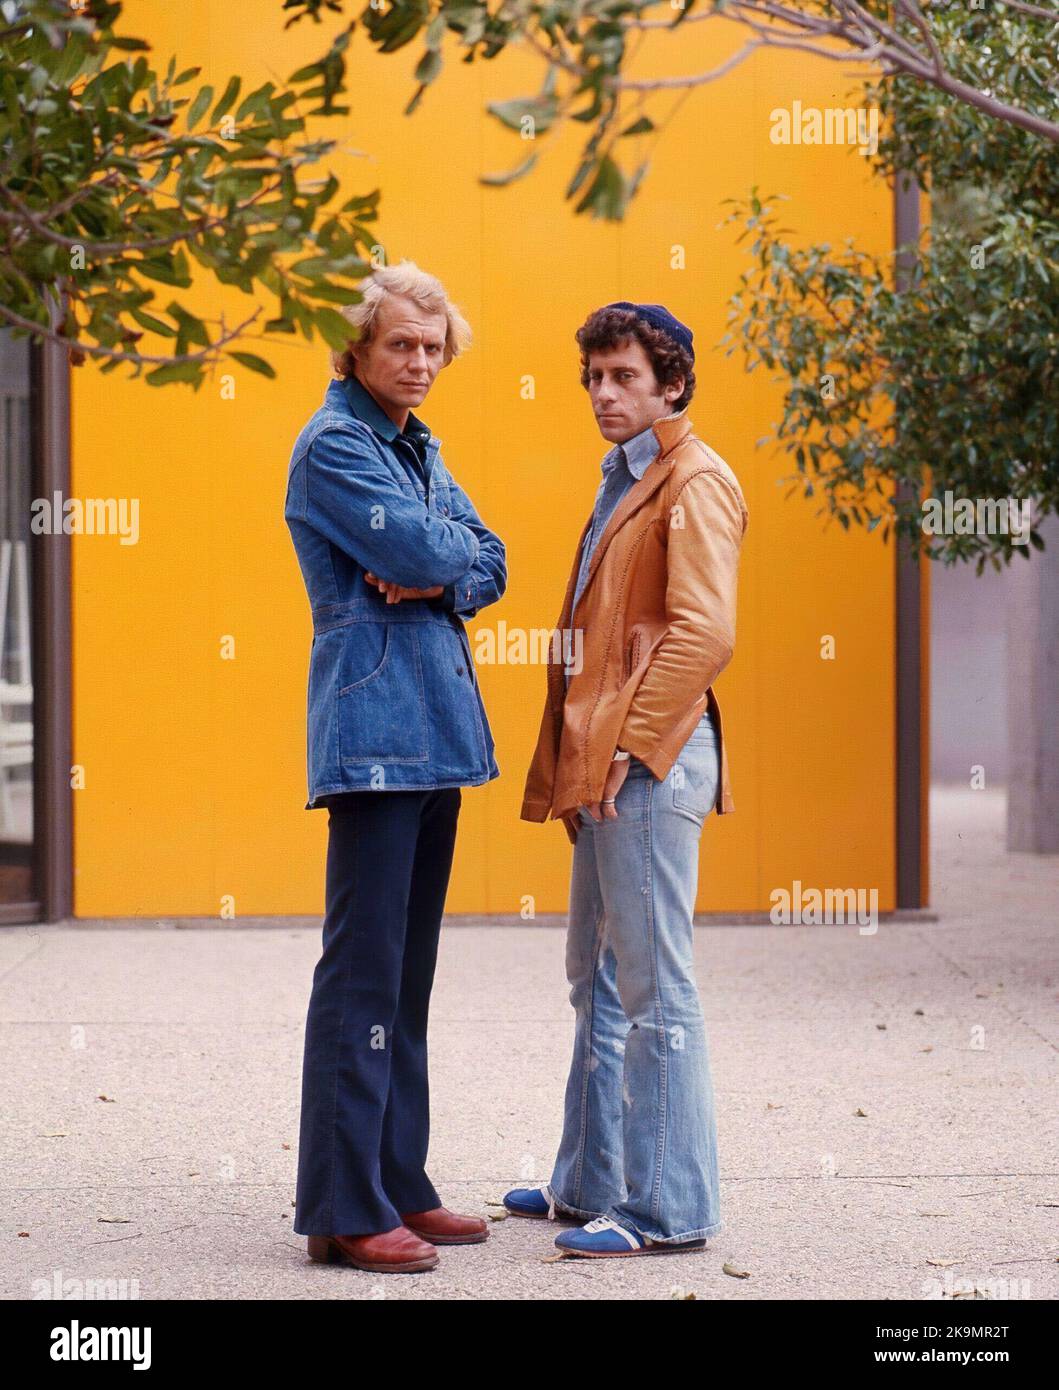 DAVID SOUL and PAUL MICHAEL GLASER in STARSKY AND HUTCH (1975), directed by DON WEIS, PAUL MICHAEL GLASER, EARL BELLAMY and GEORGE MCCOWAN. Credit: SPELLING-GOLDBERG PRODUCTIONS / Album Stock Photo